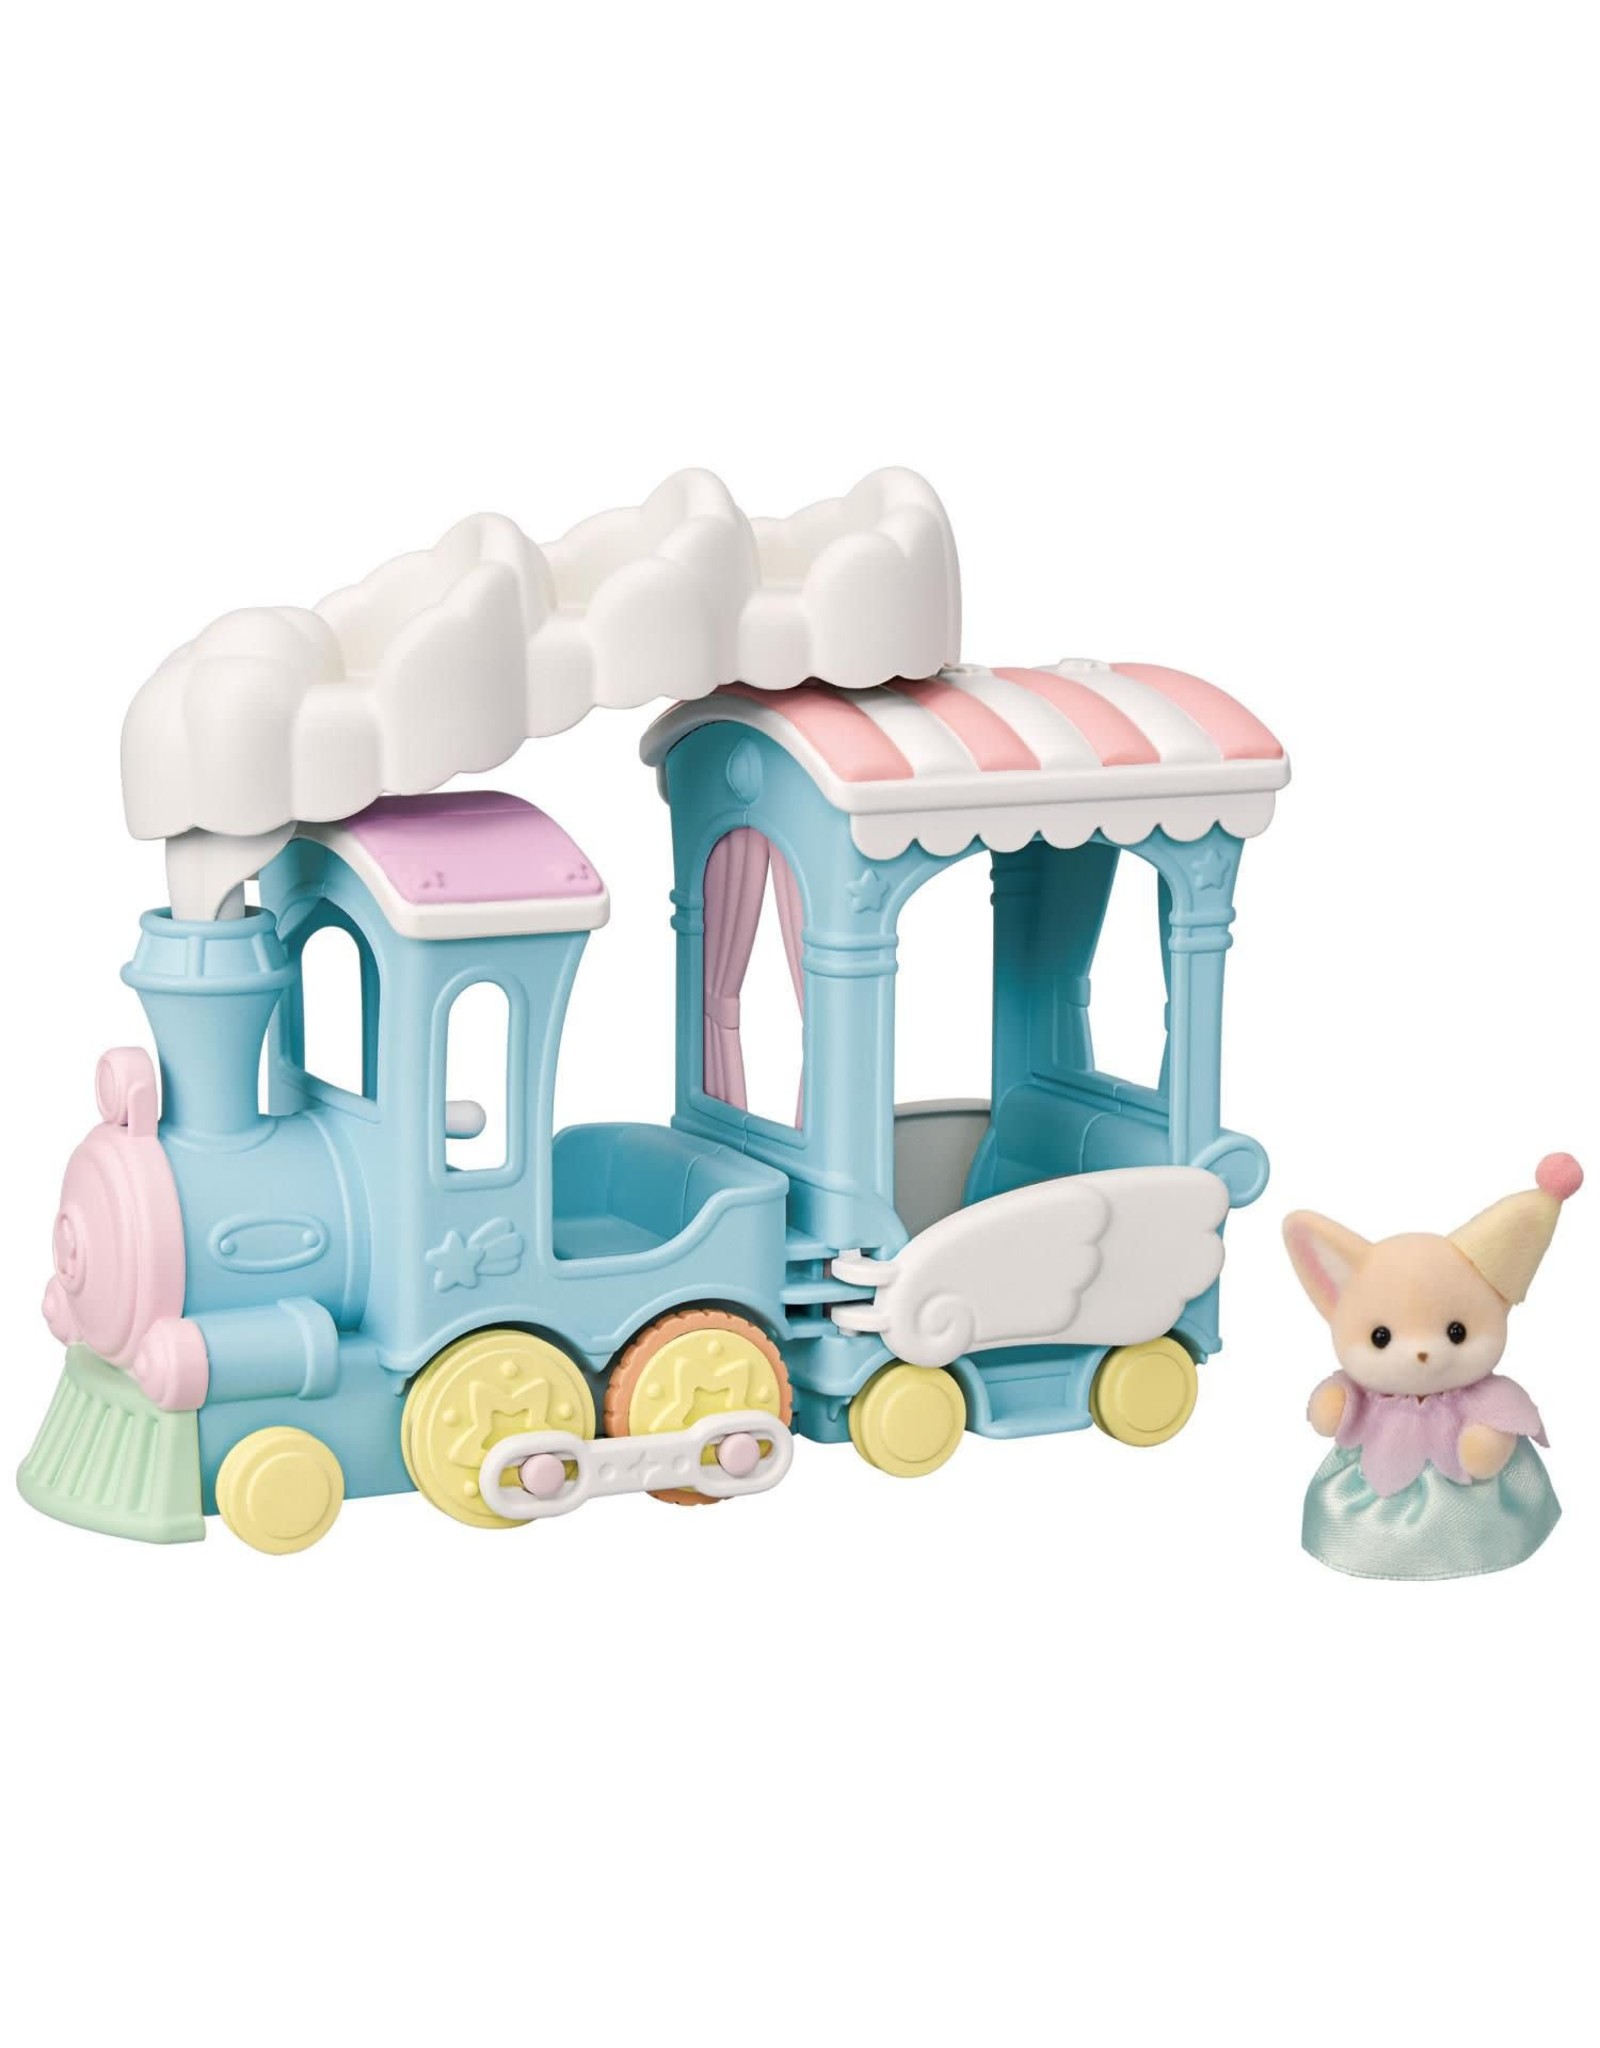 Calico Critters Calico Critters Floating Cloud Rainbow Train